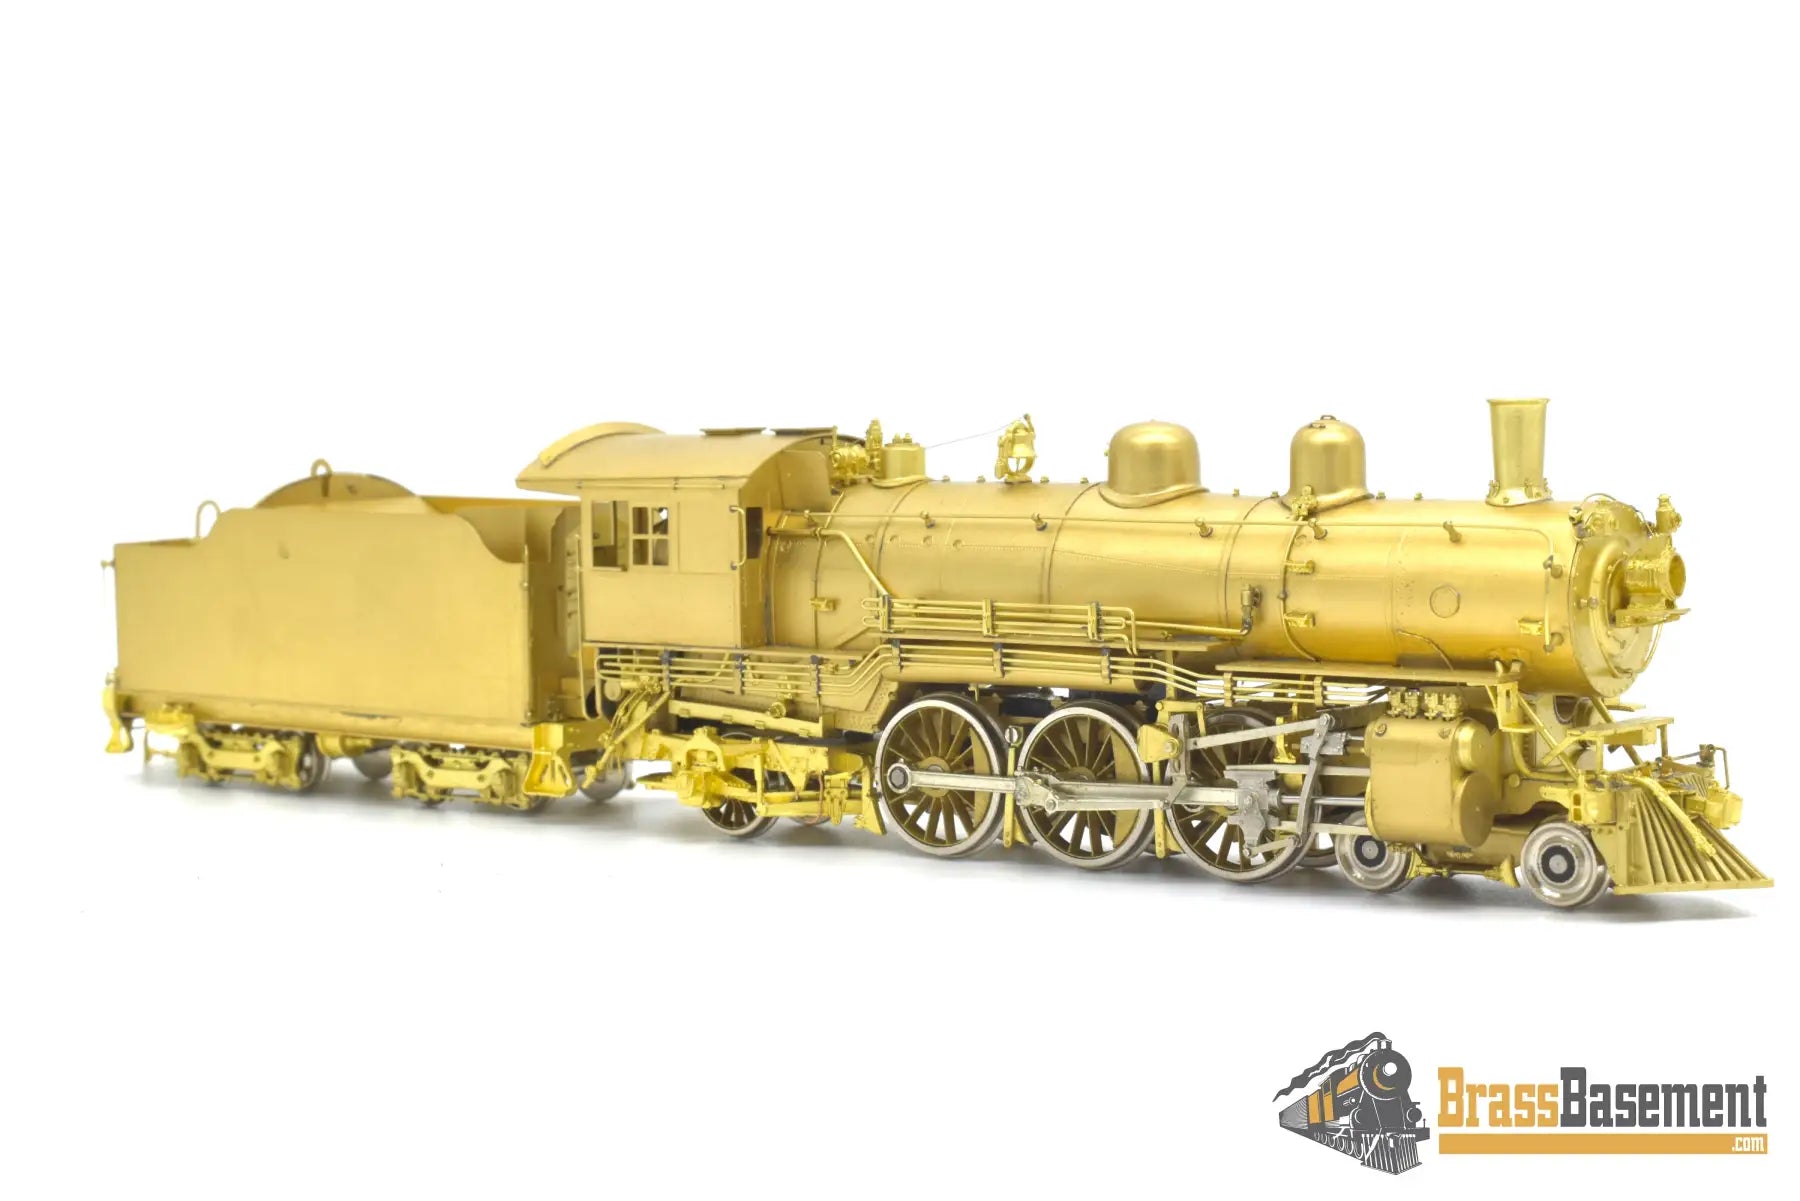 Ho Brass - W&R Northern Pacific Q - 3 4 - 6 - 2 Mint Condition Steam